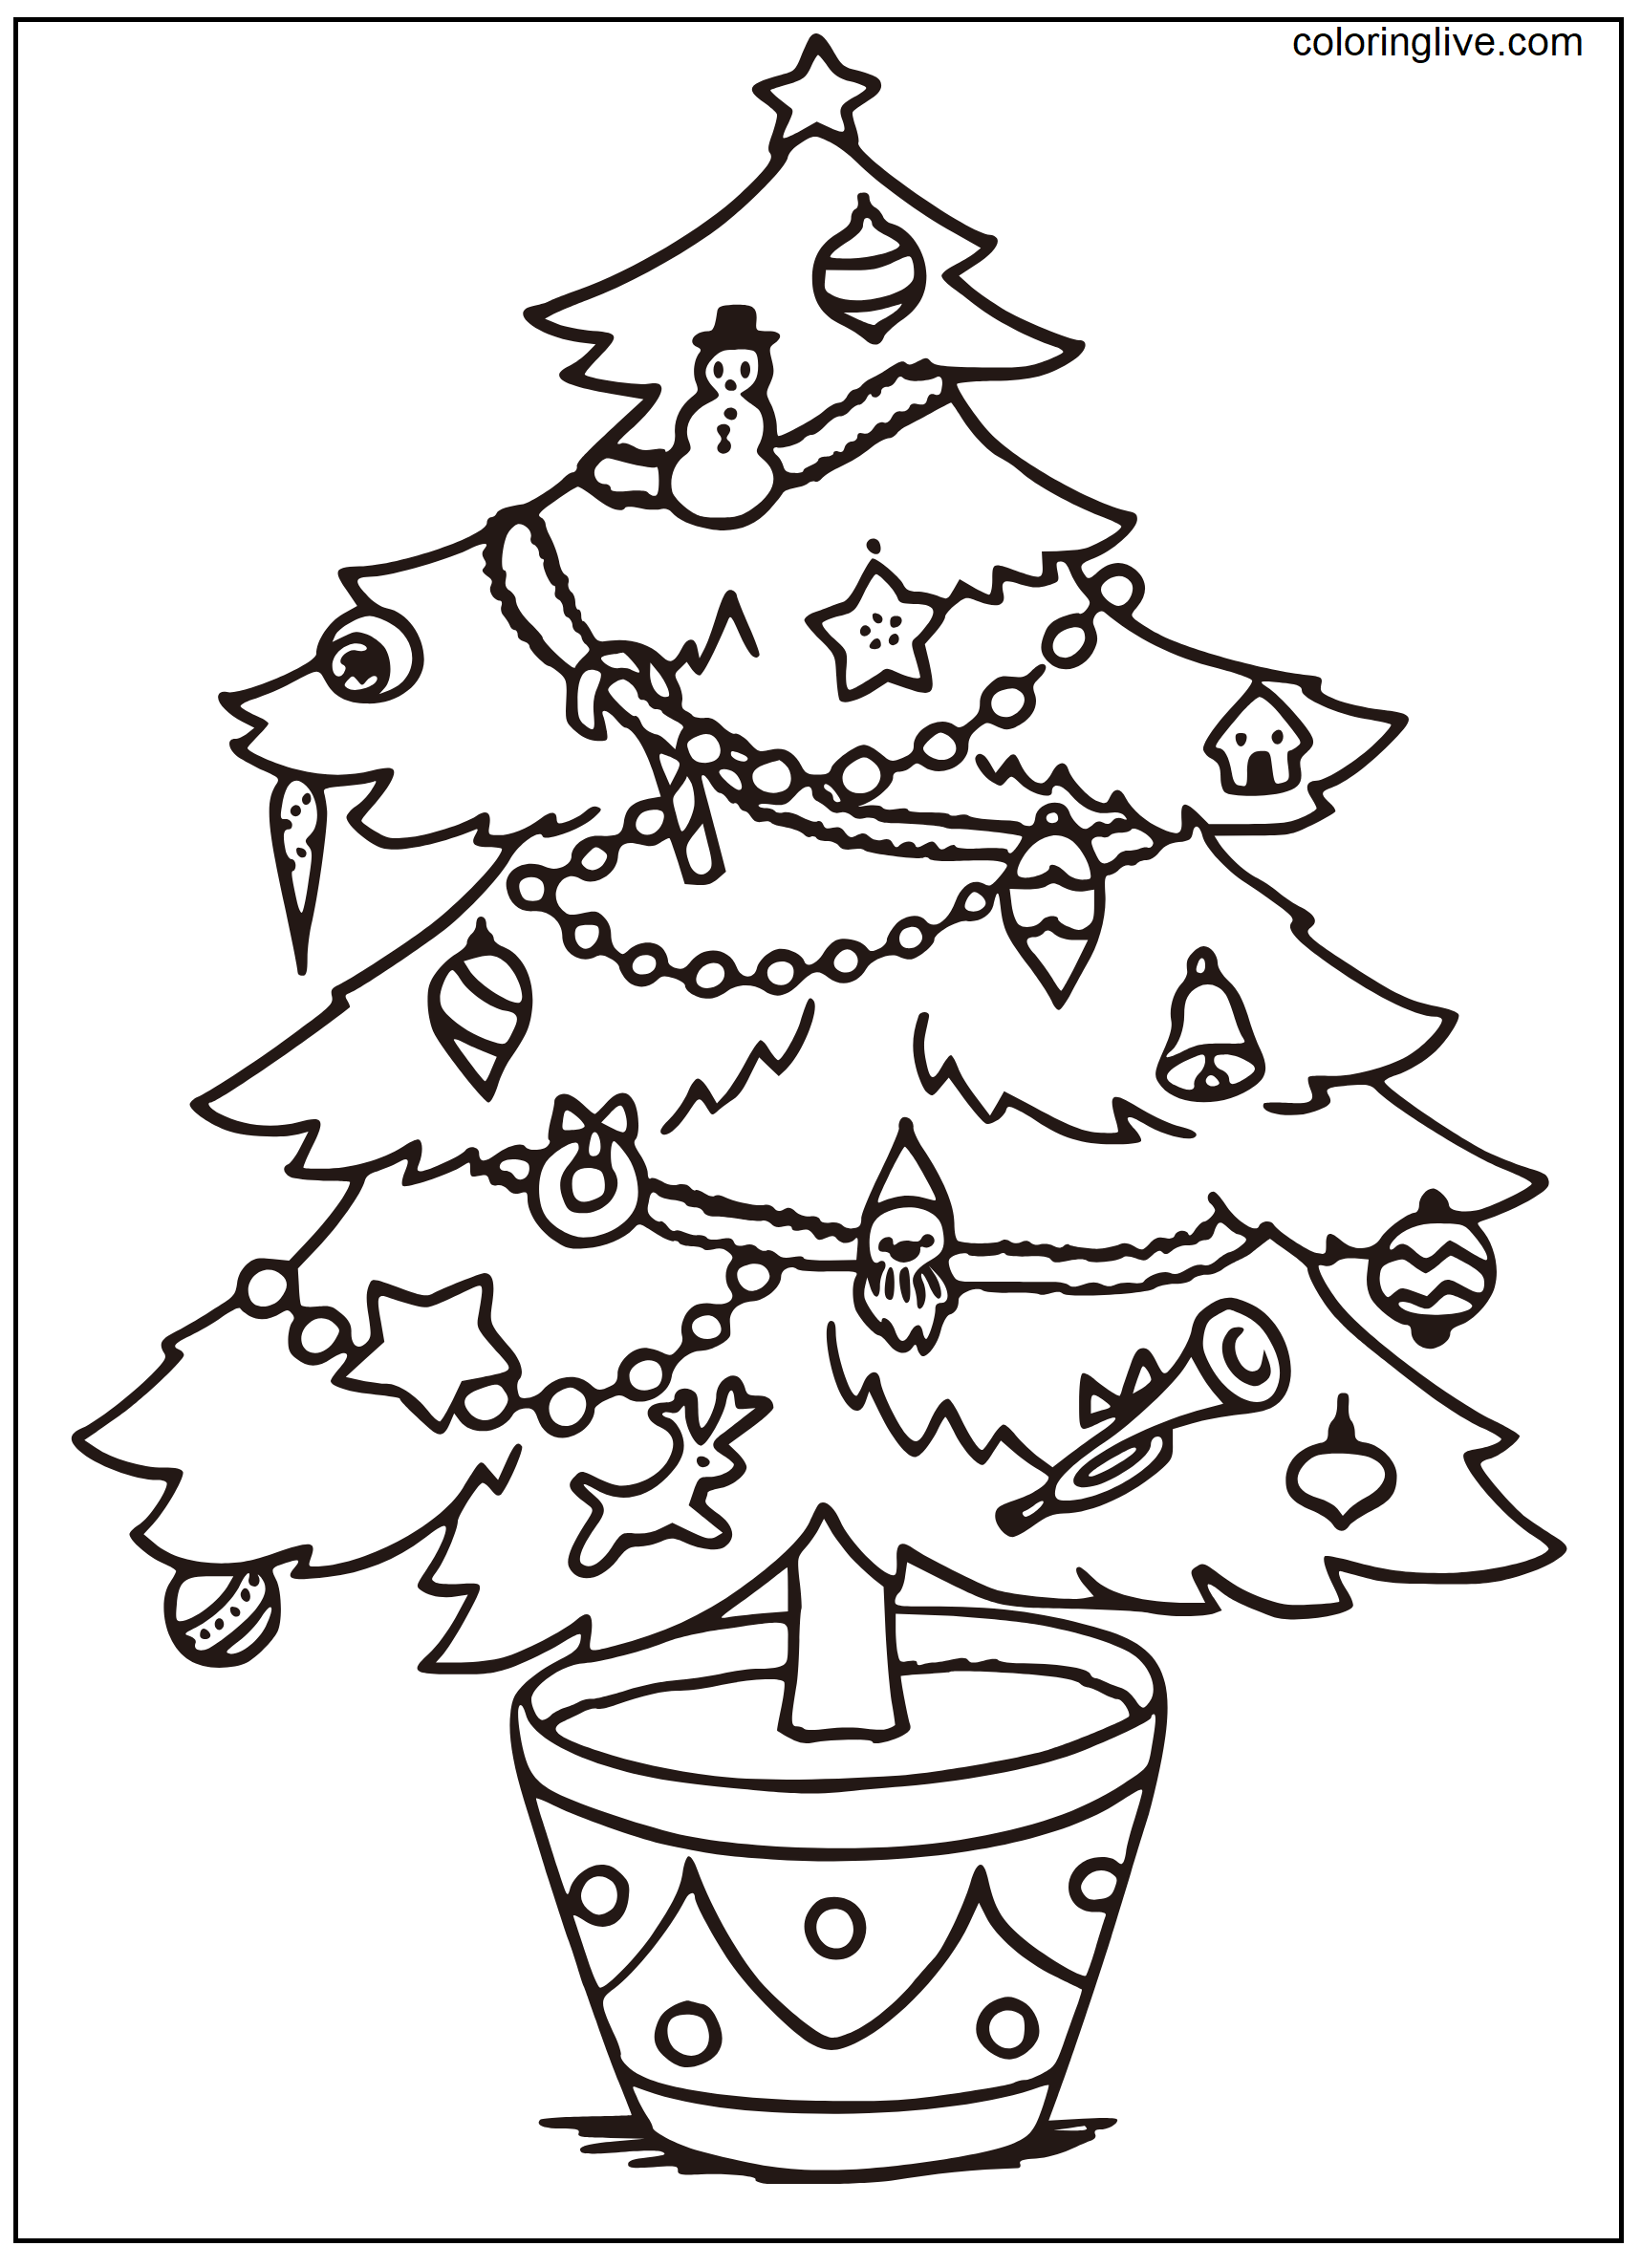 Printable Stylized Christmas tree Coloring Page for kids.